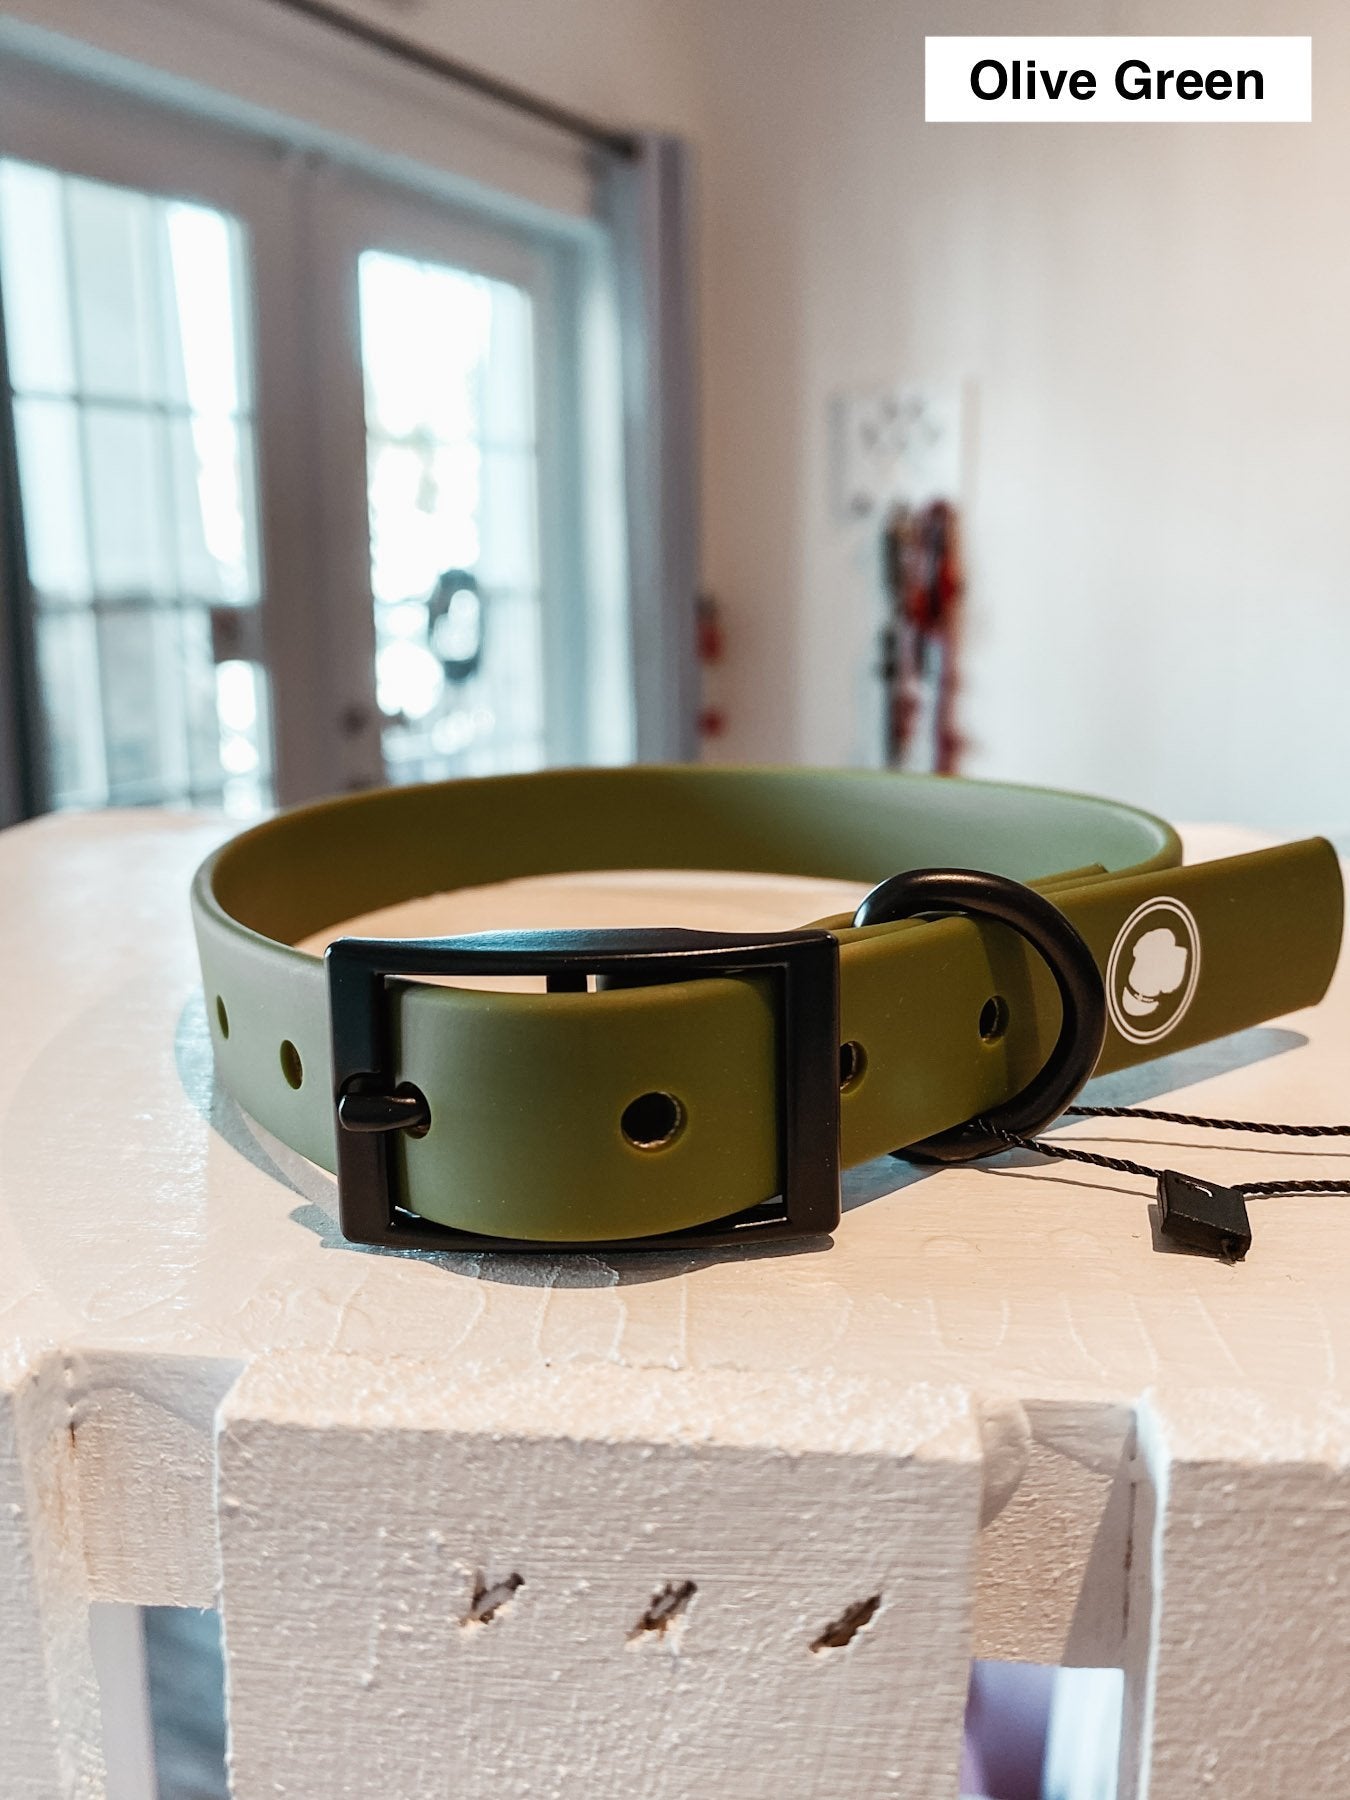 This Modern Dog Collar Has a Simple Aesthetic for Your Pup